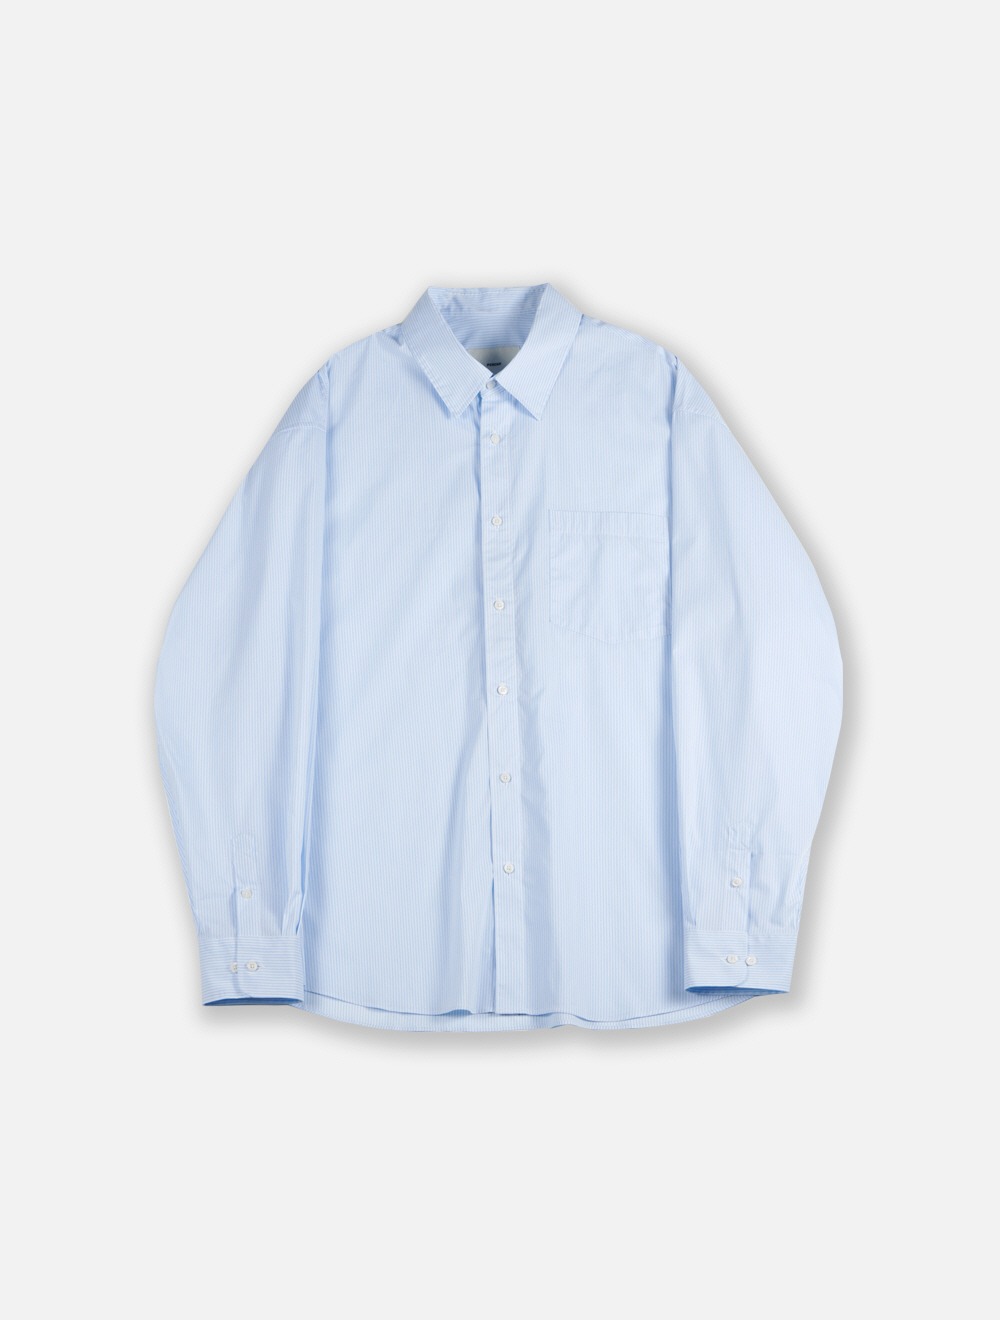 relaxed shirts_blue stripe